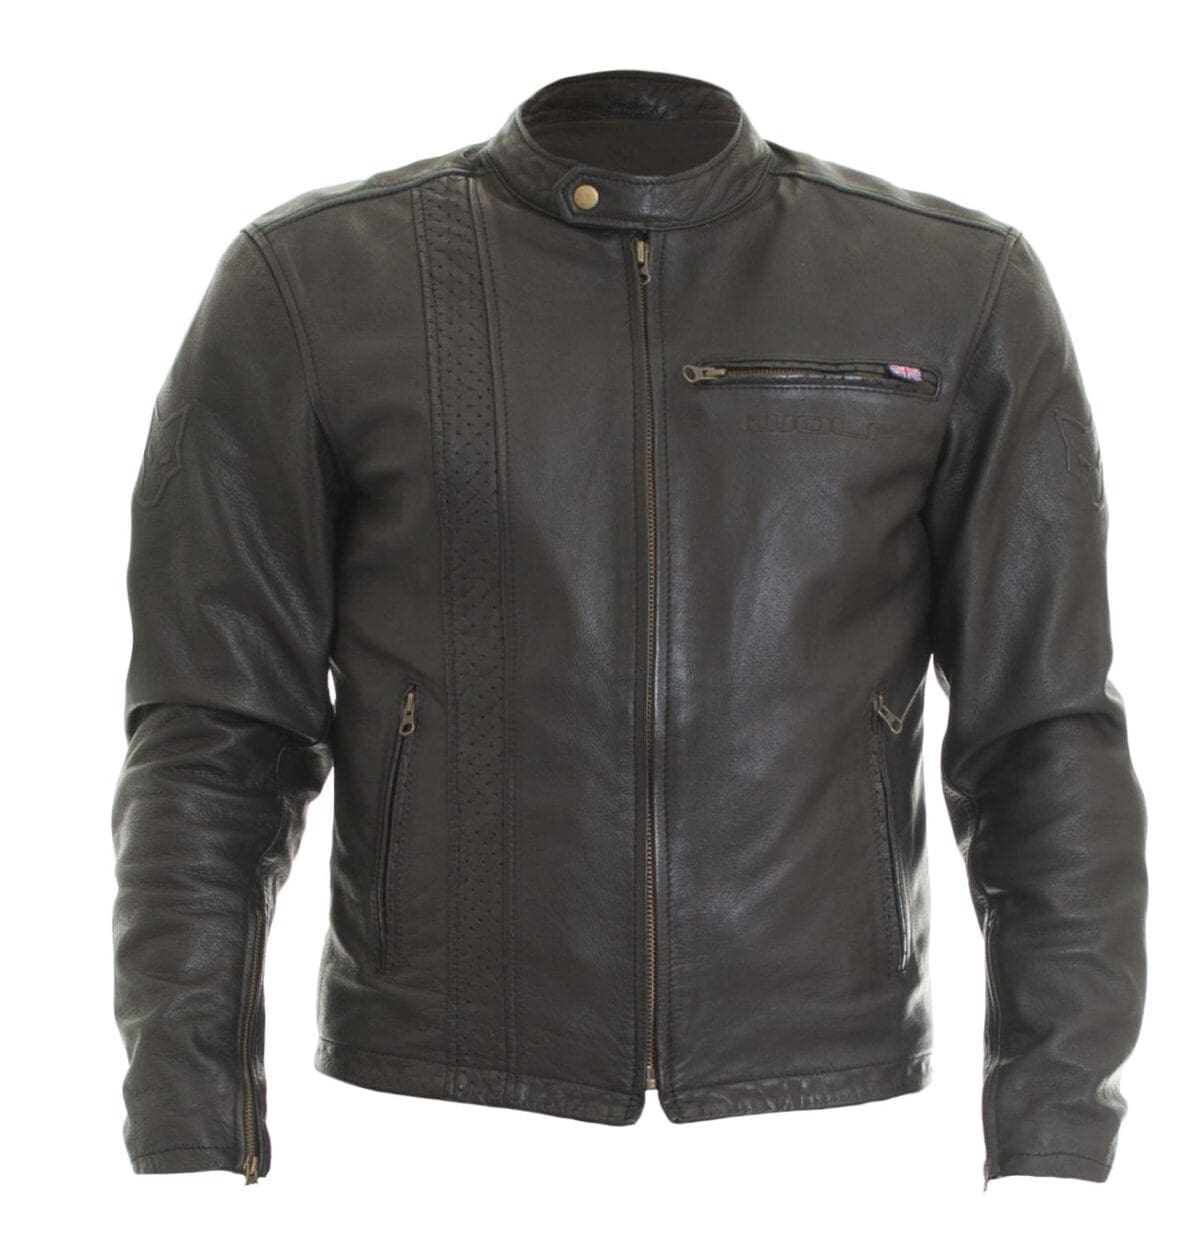 New leathers and textiles from Wolf | MoreBikes